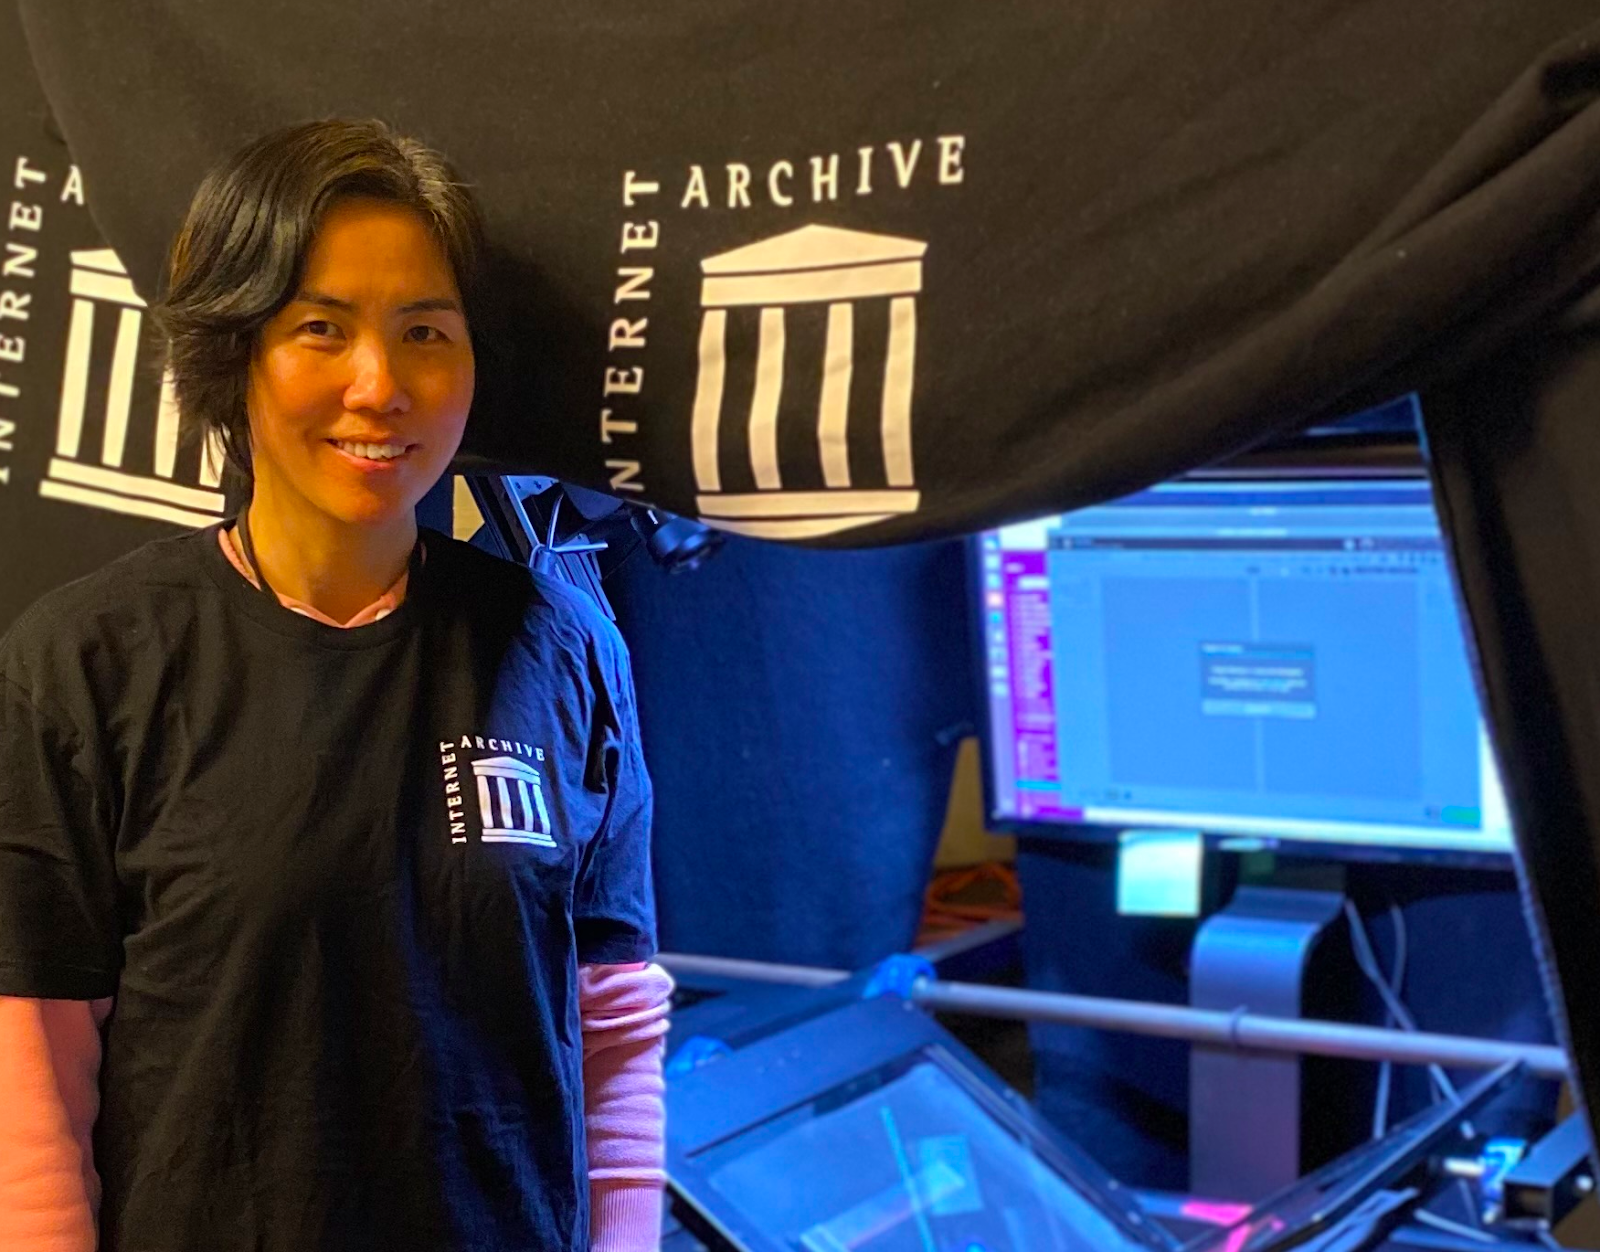 Meet Eliza Zhang, Book Scanner and Viral Video Star - Internet Archive Blogs